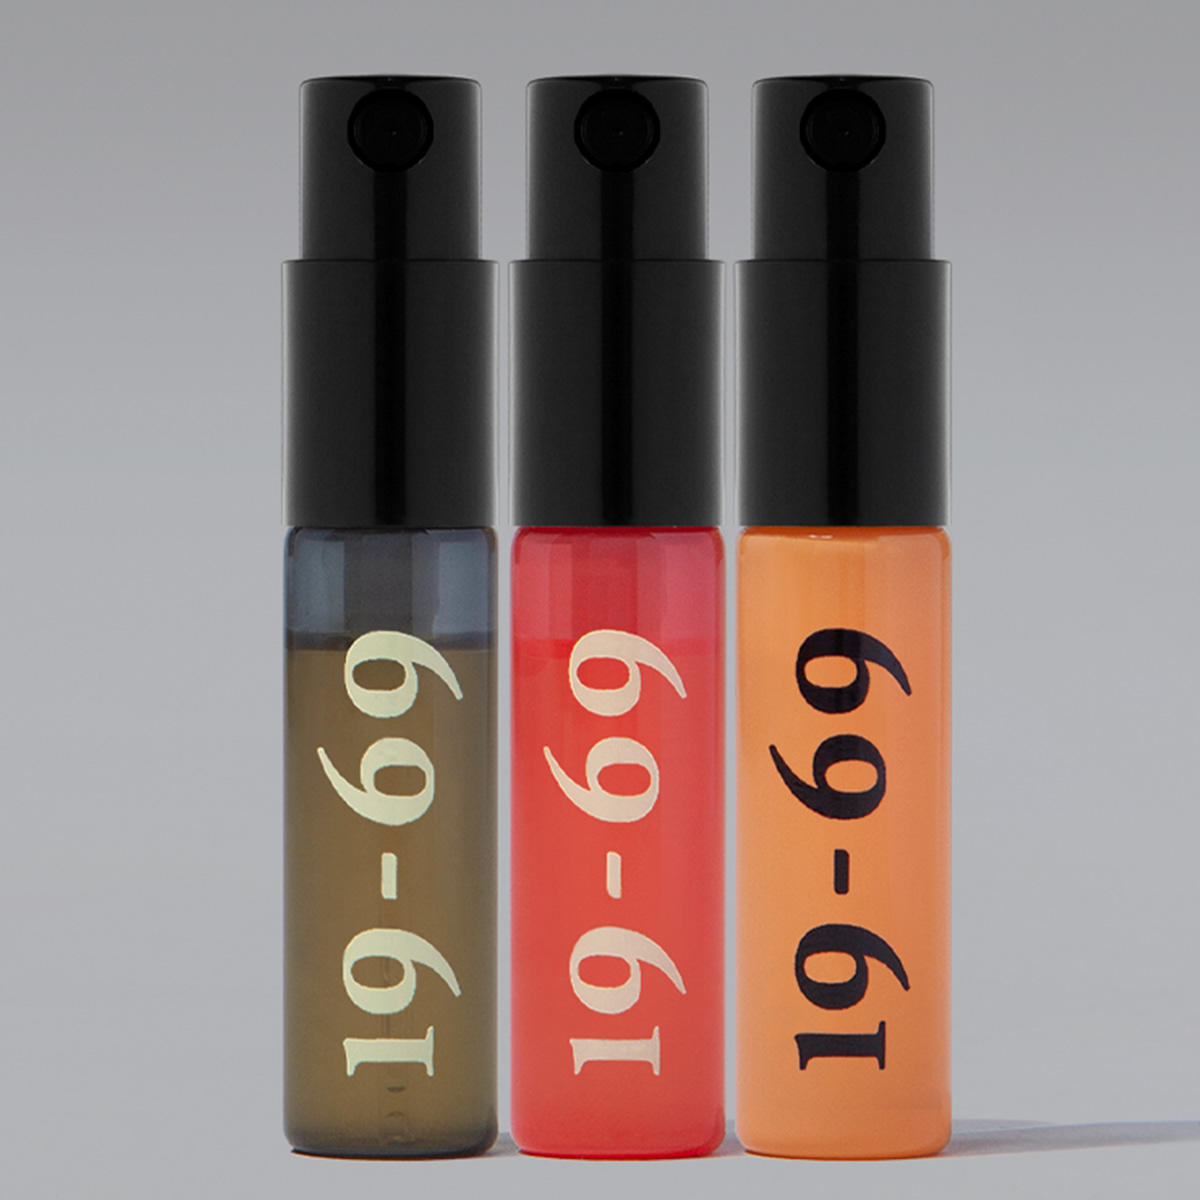 19-69 The Collection Five 3 x 2,5 ml - 2